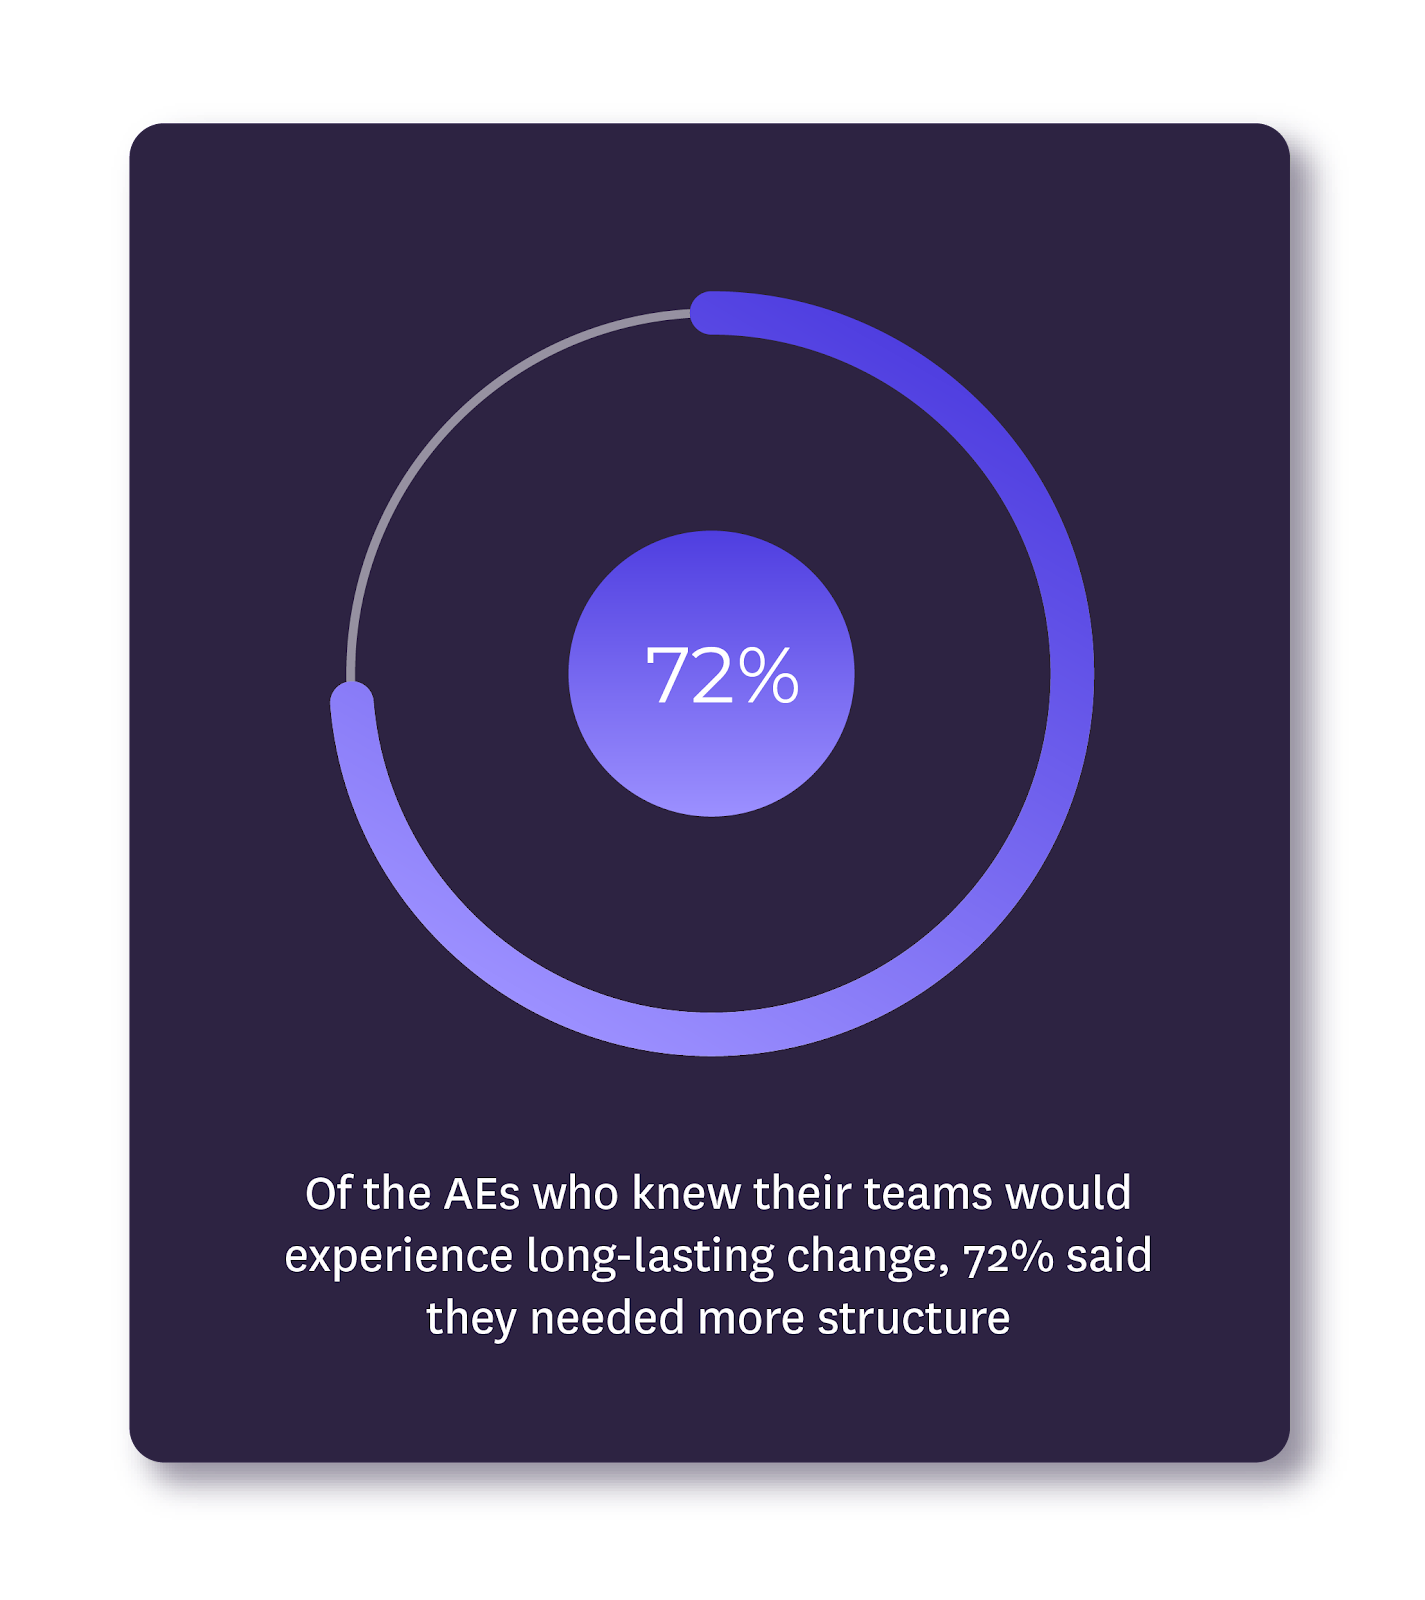 A circle graph showing that 72% of AEs knew their teams would experience long lasting change after Covid.